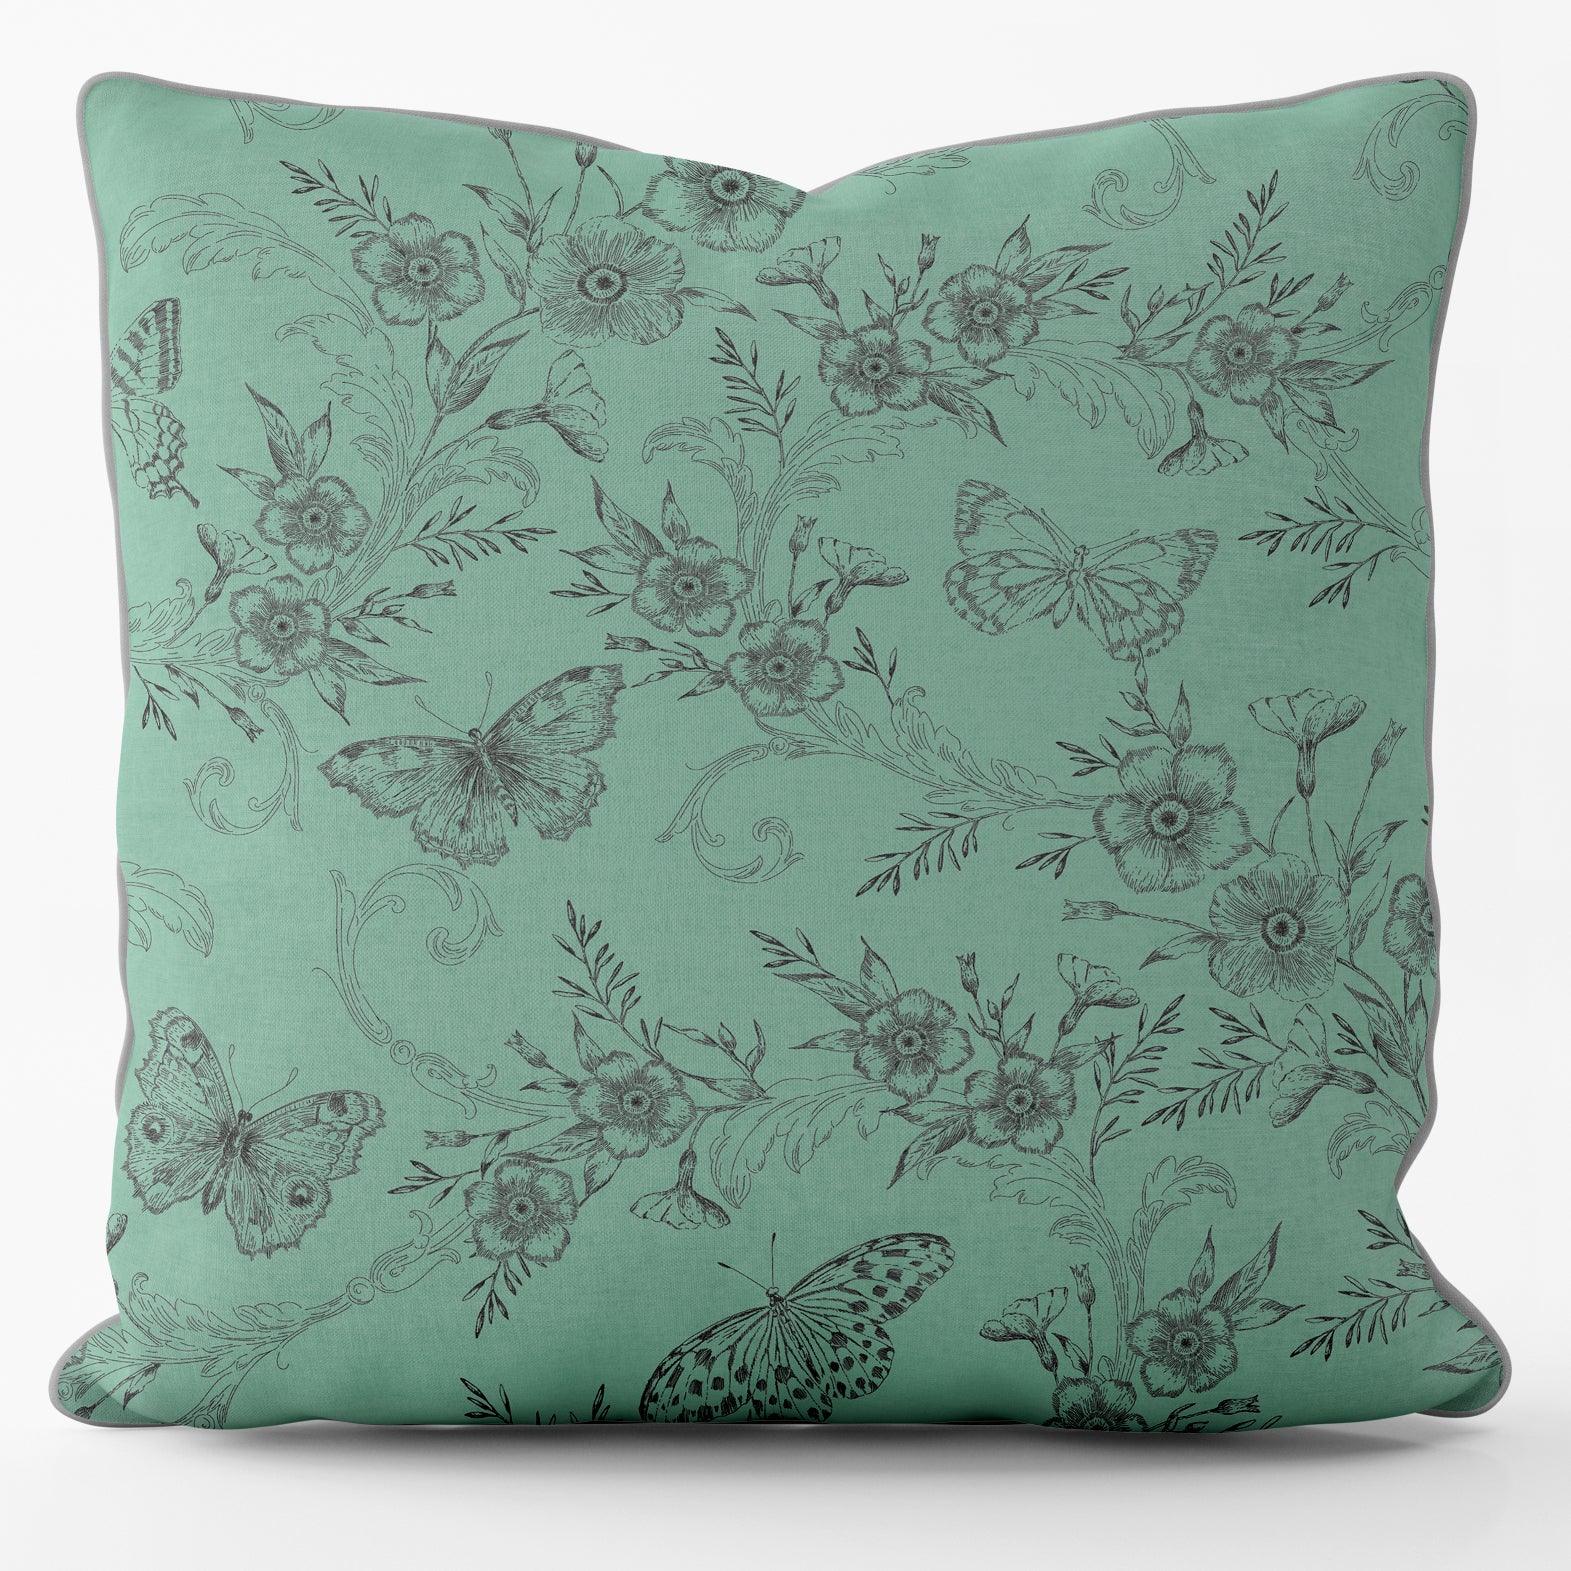 Trailing Butterfly Mint Green - House Of Turnowsky Cushion